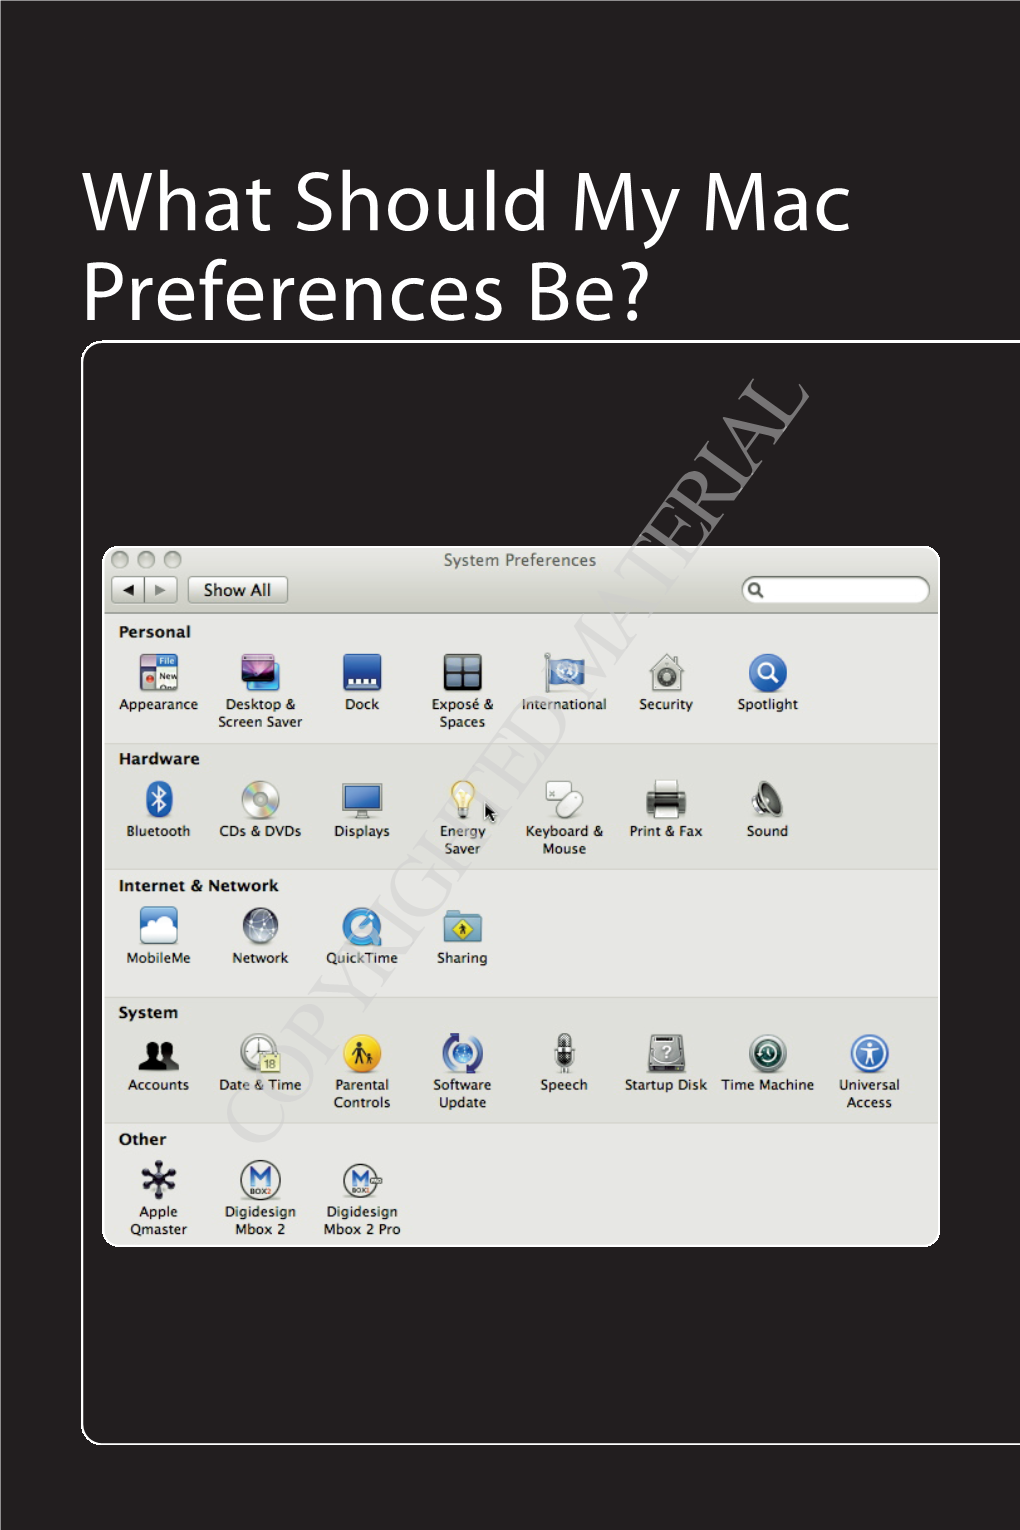 What Should My Mac Preferences Be?